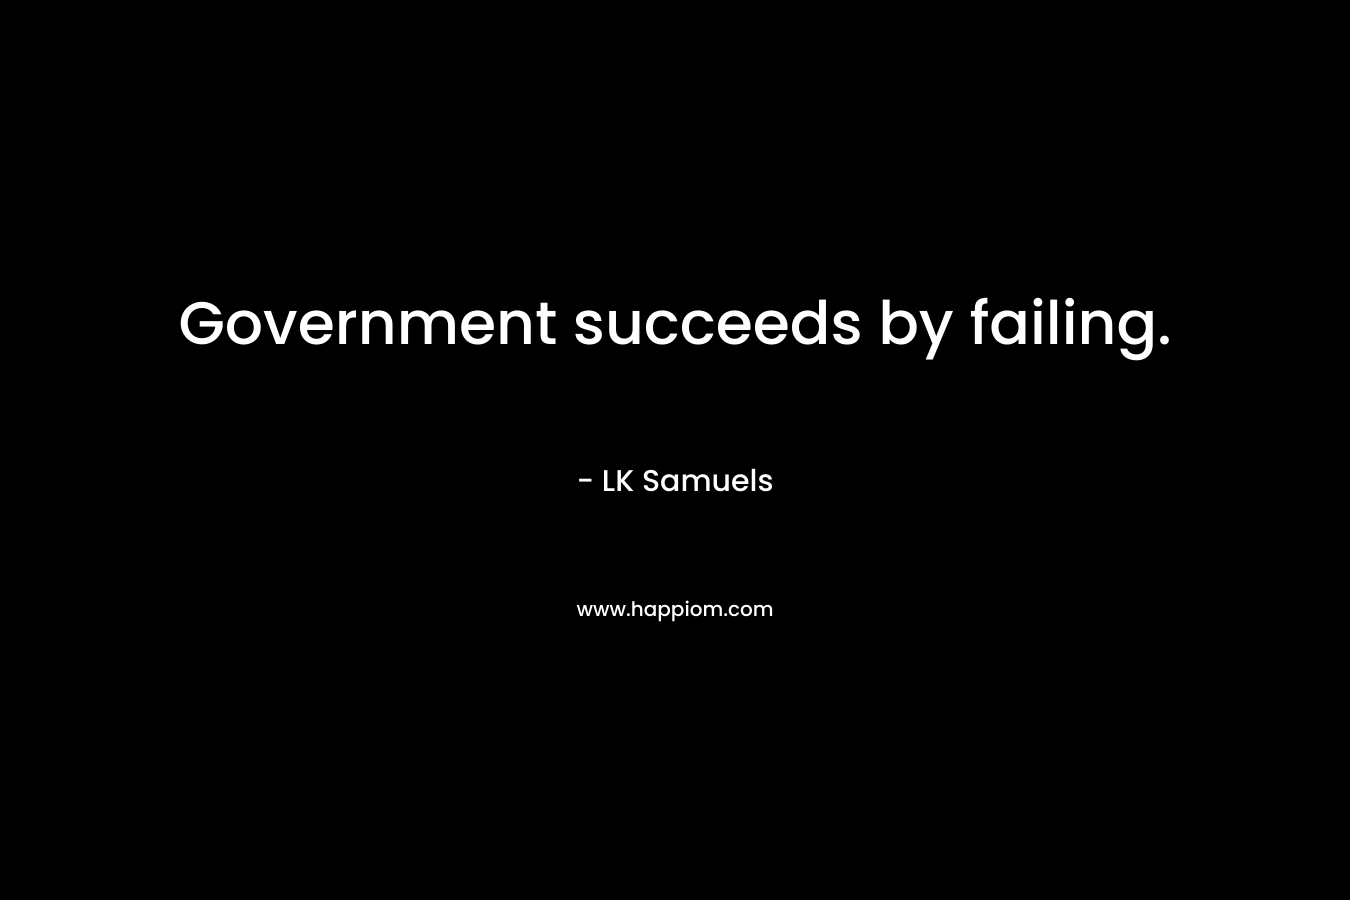 Government succeeds by failing.